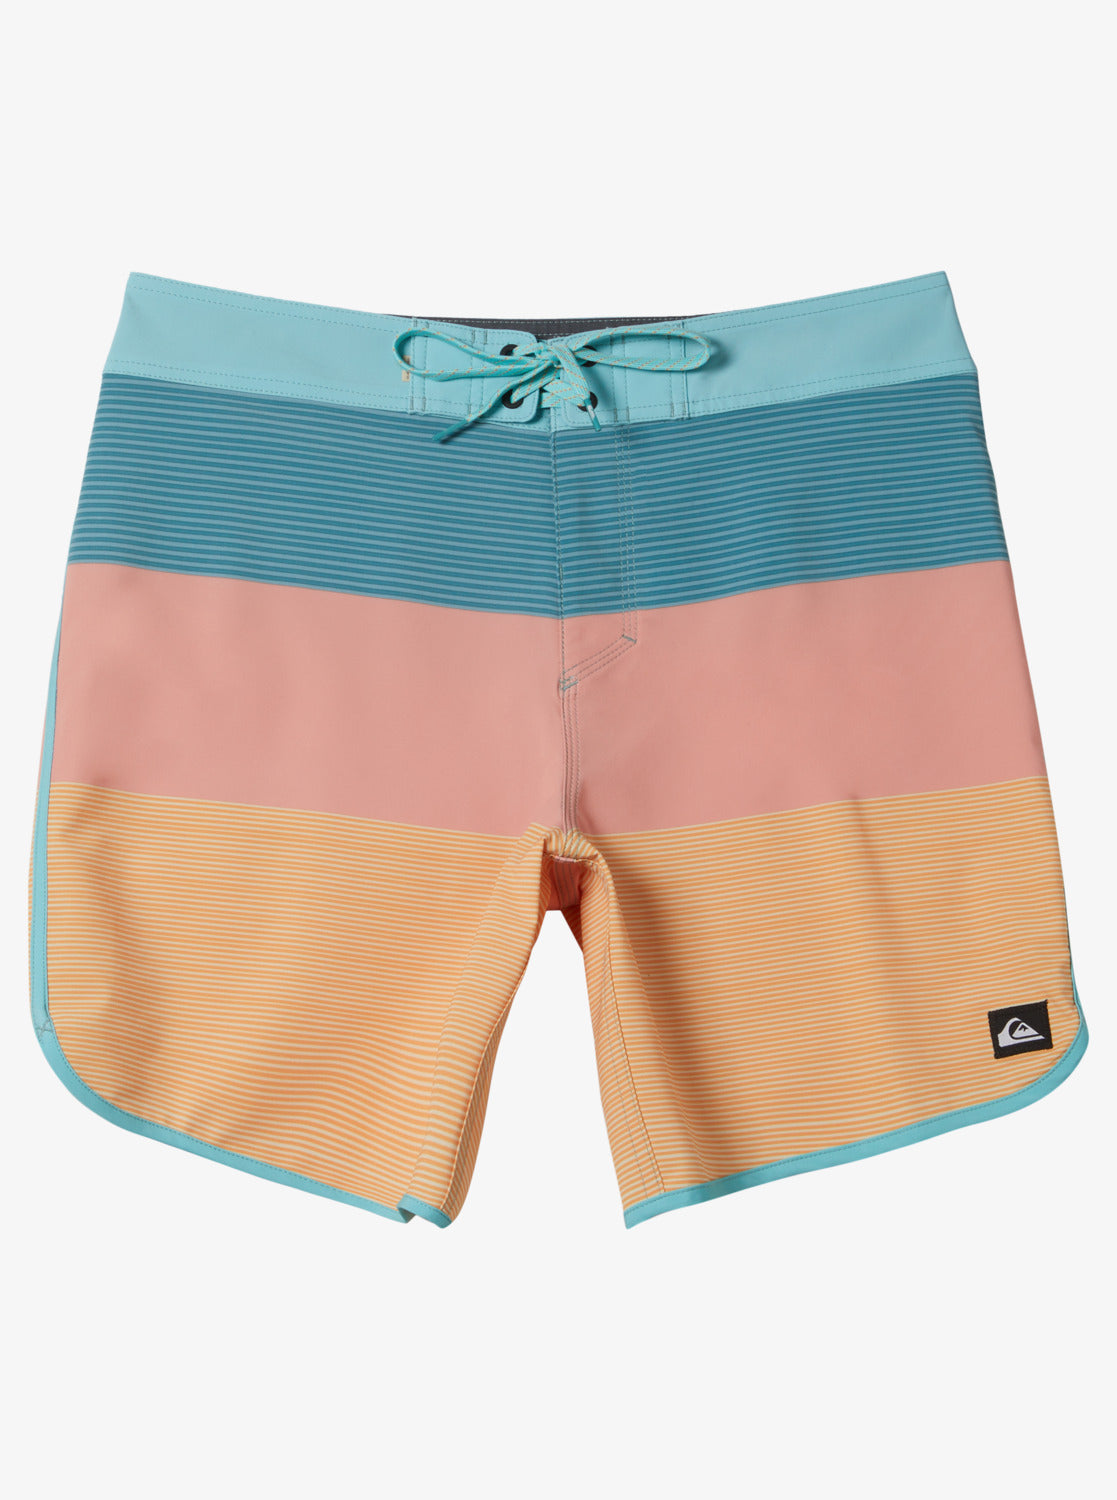 Quiksilver Official US |Surf & Snowboard Clothing